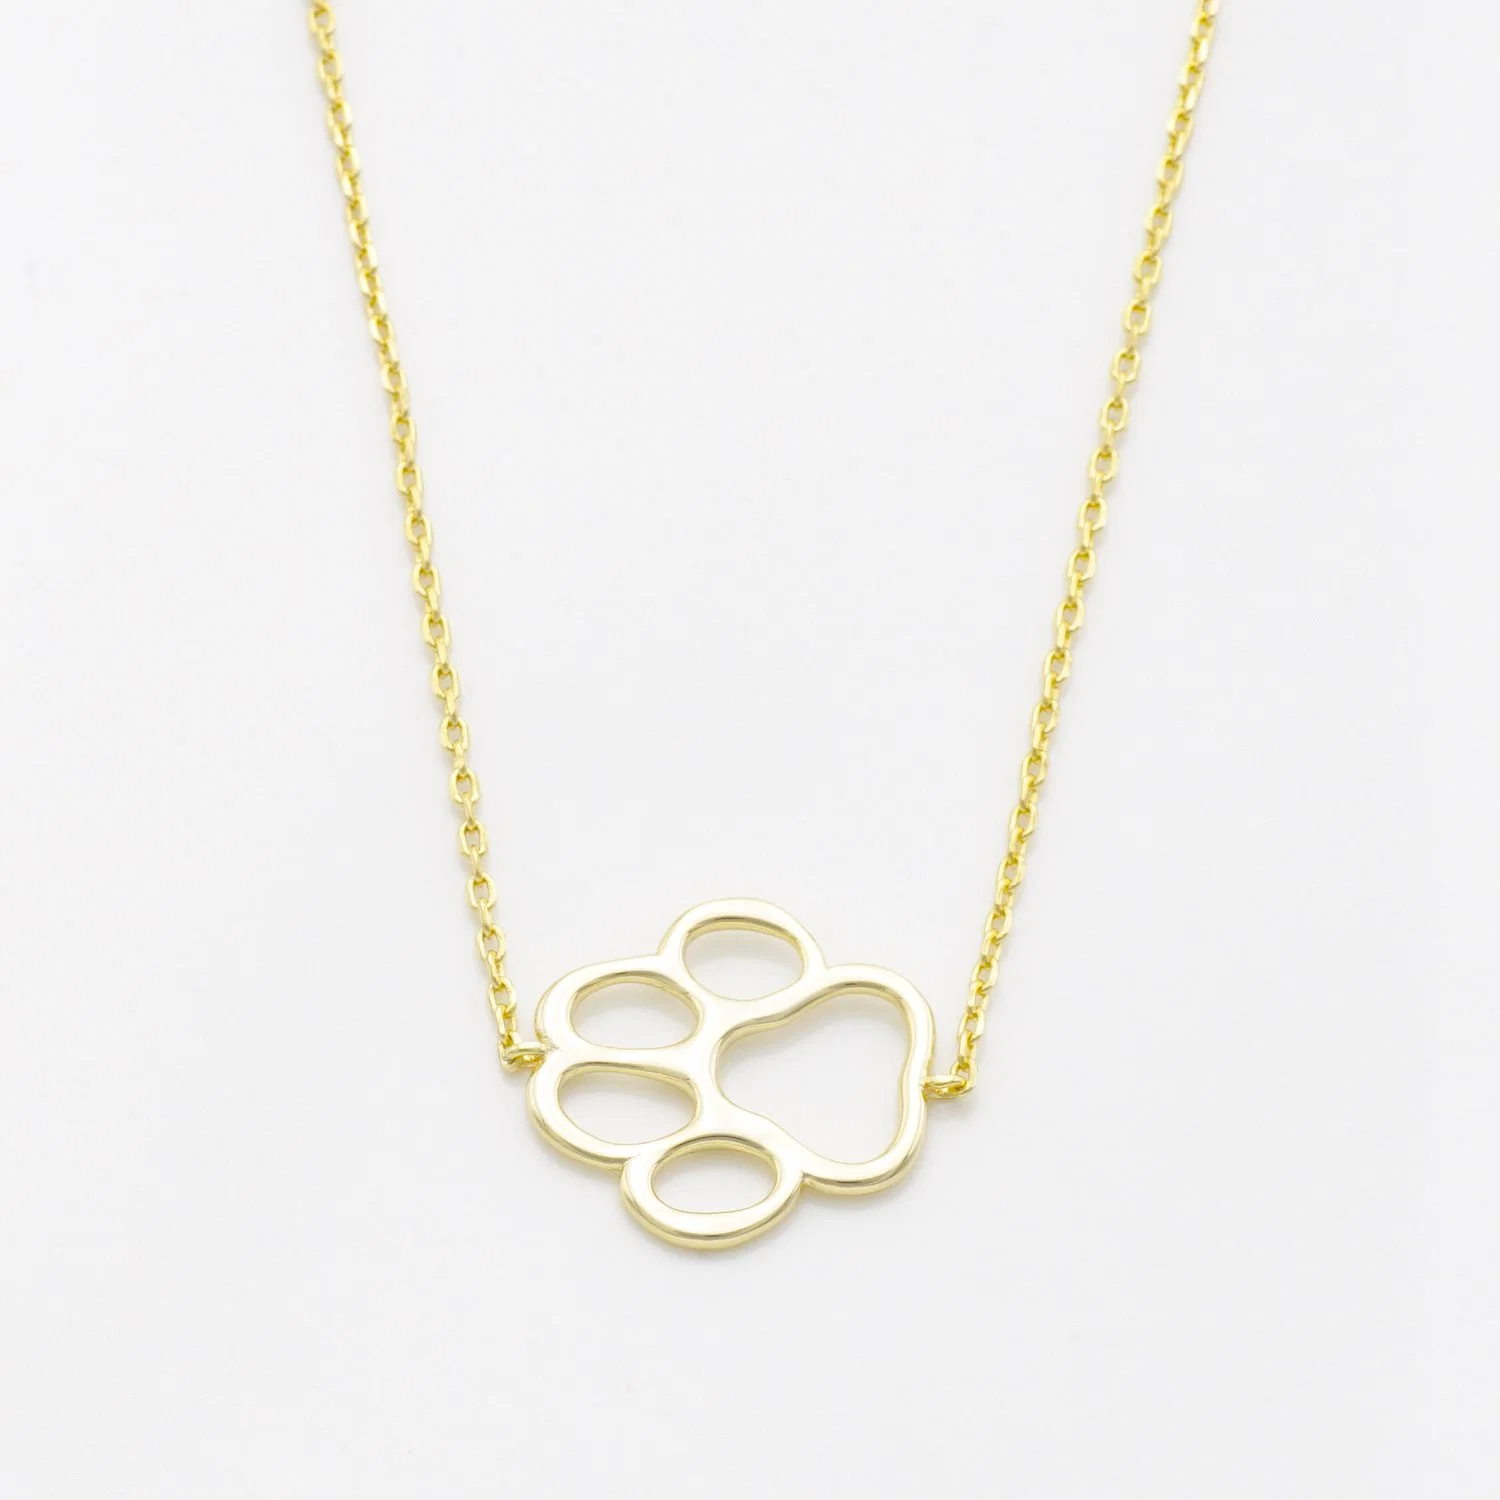 Design Pretty Simple Gold Plated Fashion Silver Jewelry Necklace Cat Paw Accessories